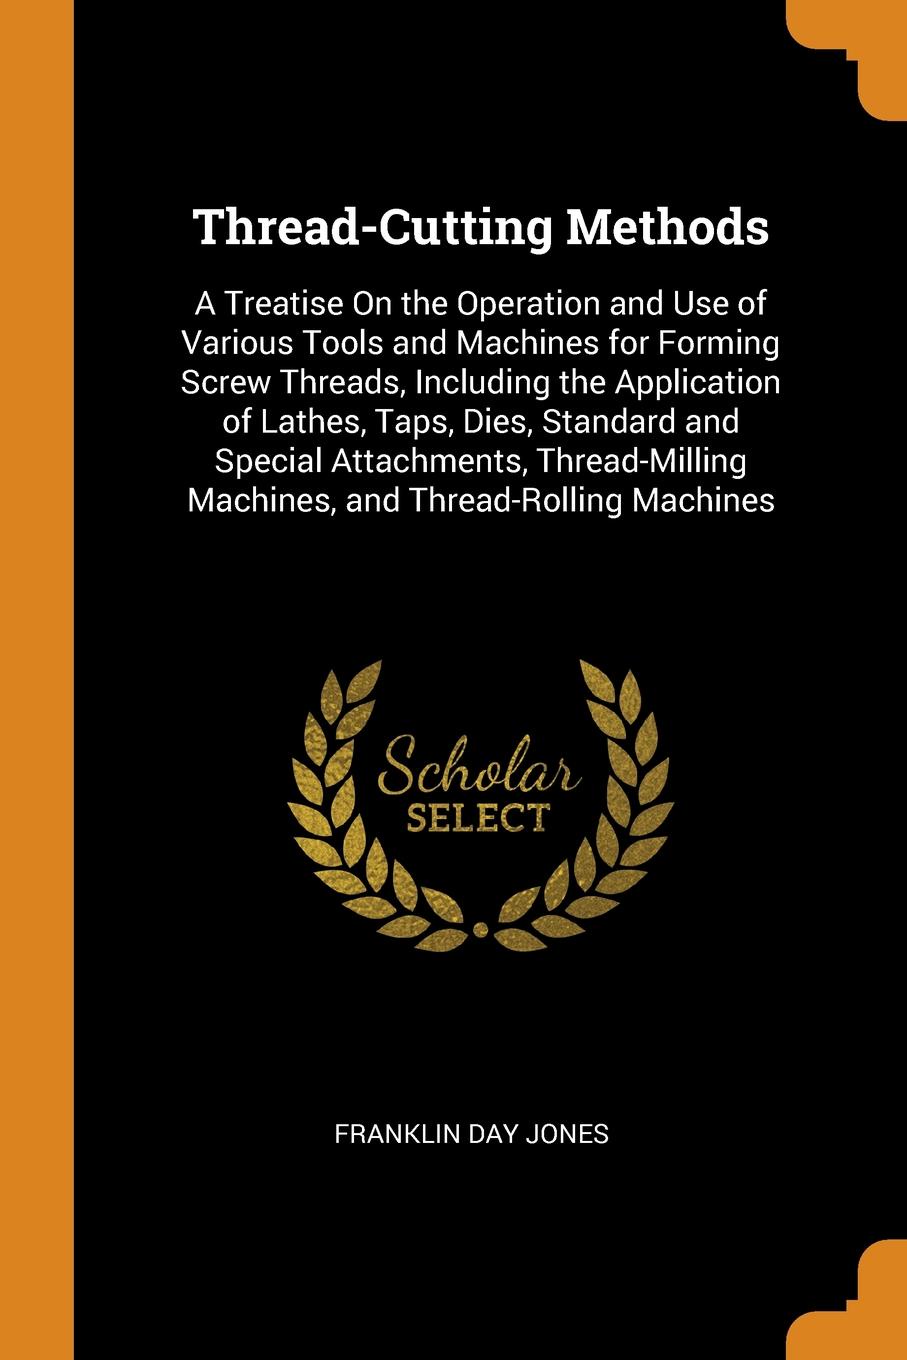 Thread-Cutting Methods. A Treatise On the Operation and Use of Various Tools and Machines for Forming Screw Threads, Including the Application of Lathes, Taps, Dies, Standard and Special Attachments, Thread-Milling Machines, and Thread-Rolling Mac...